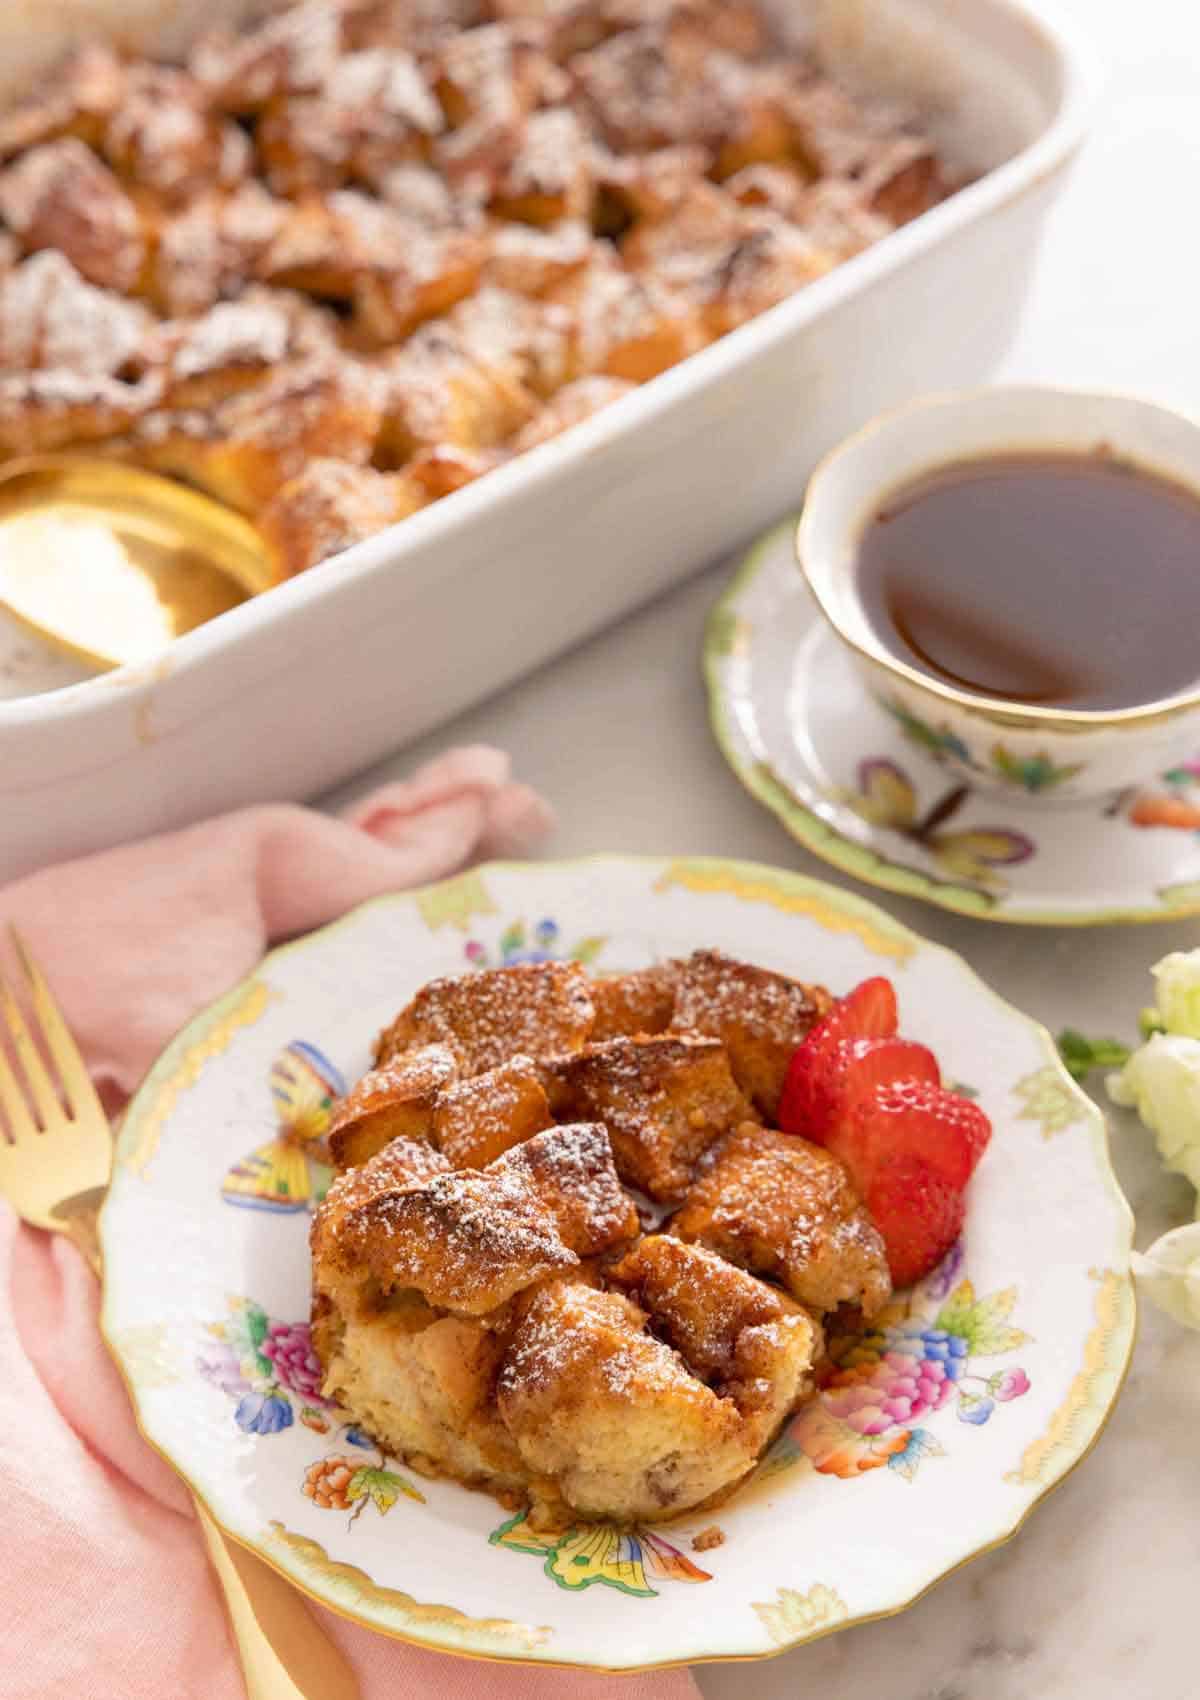 A plate with a serving of French toast casserole with sliced strawberries in front of a cup of coffee and a casserole dish.